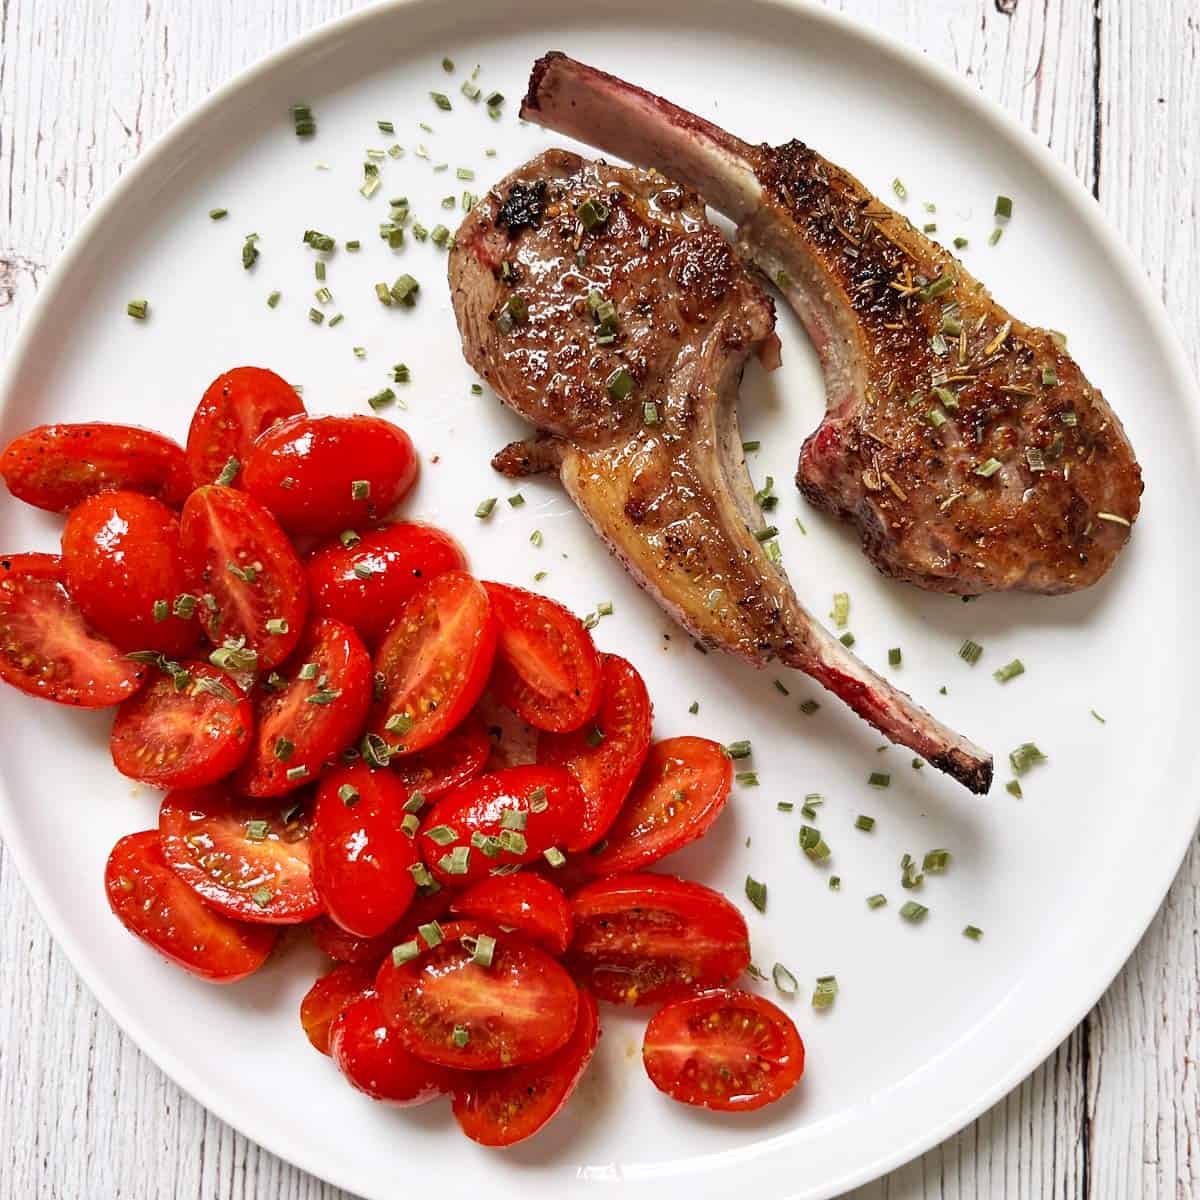 Two lamb chops are served with tomato salad.